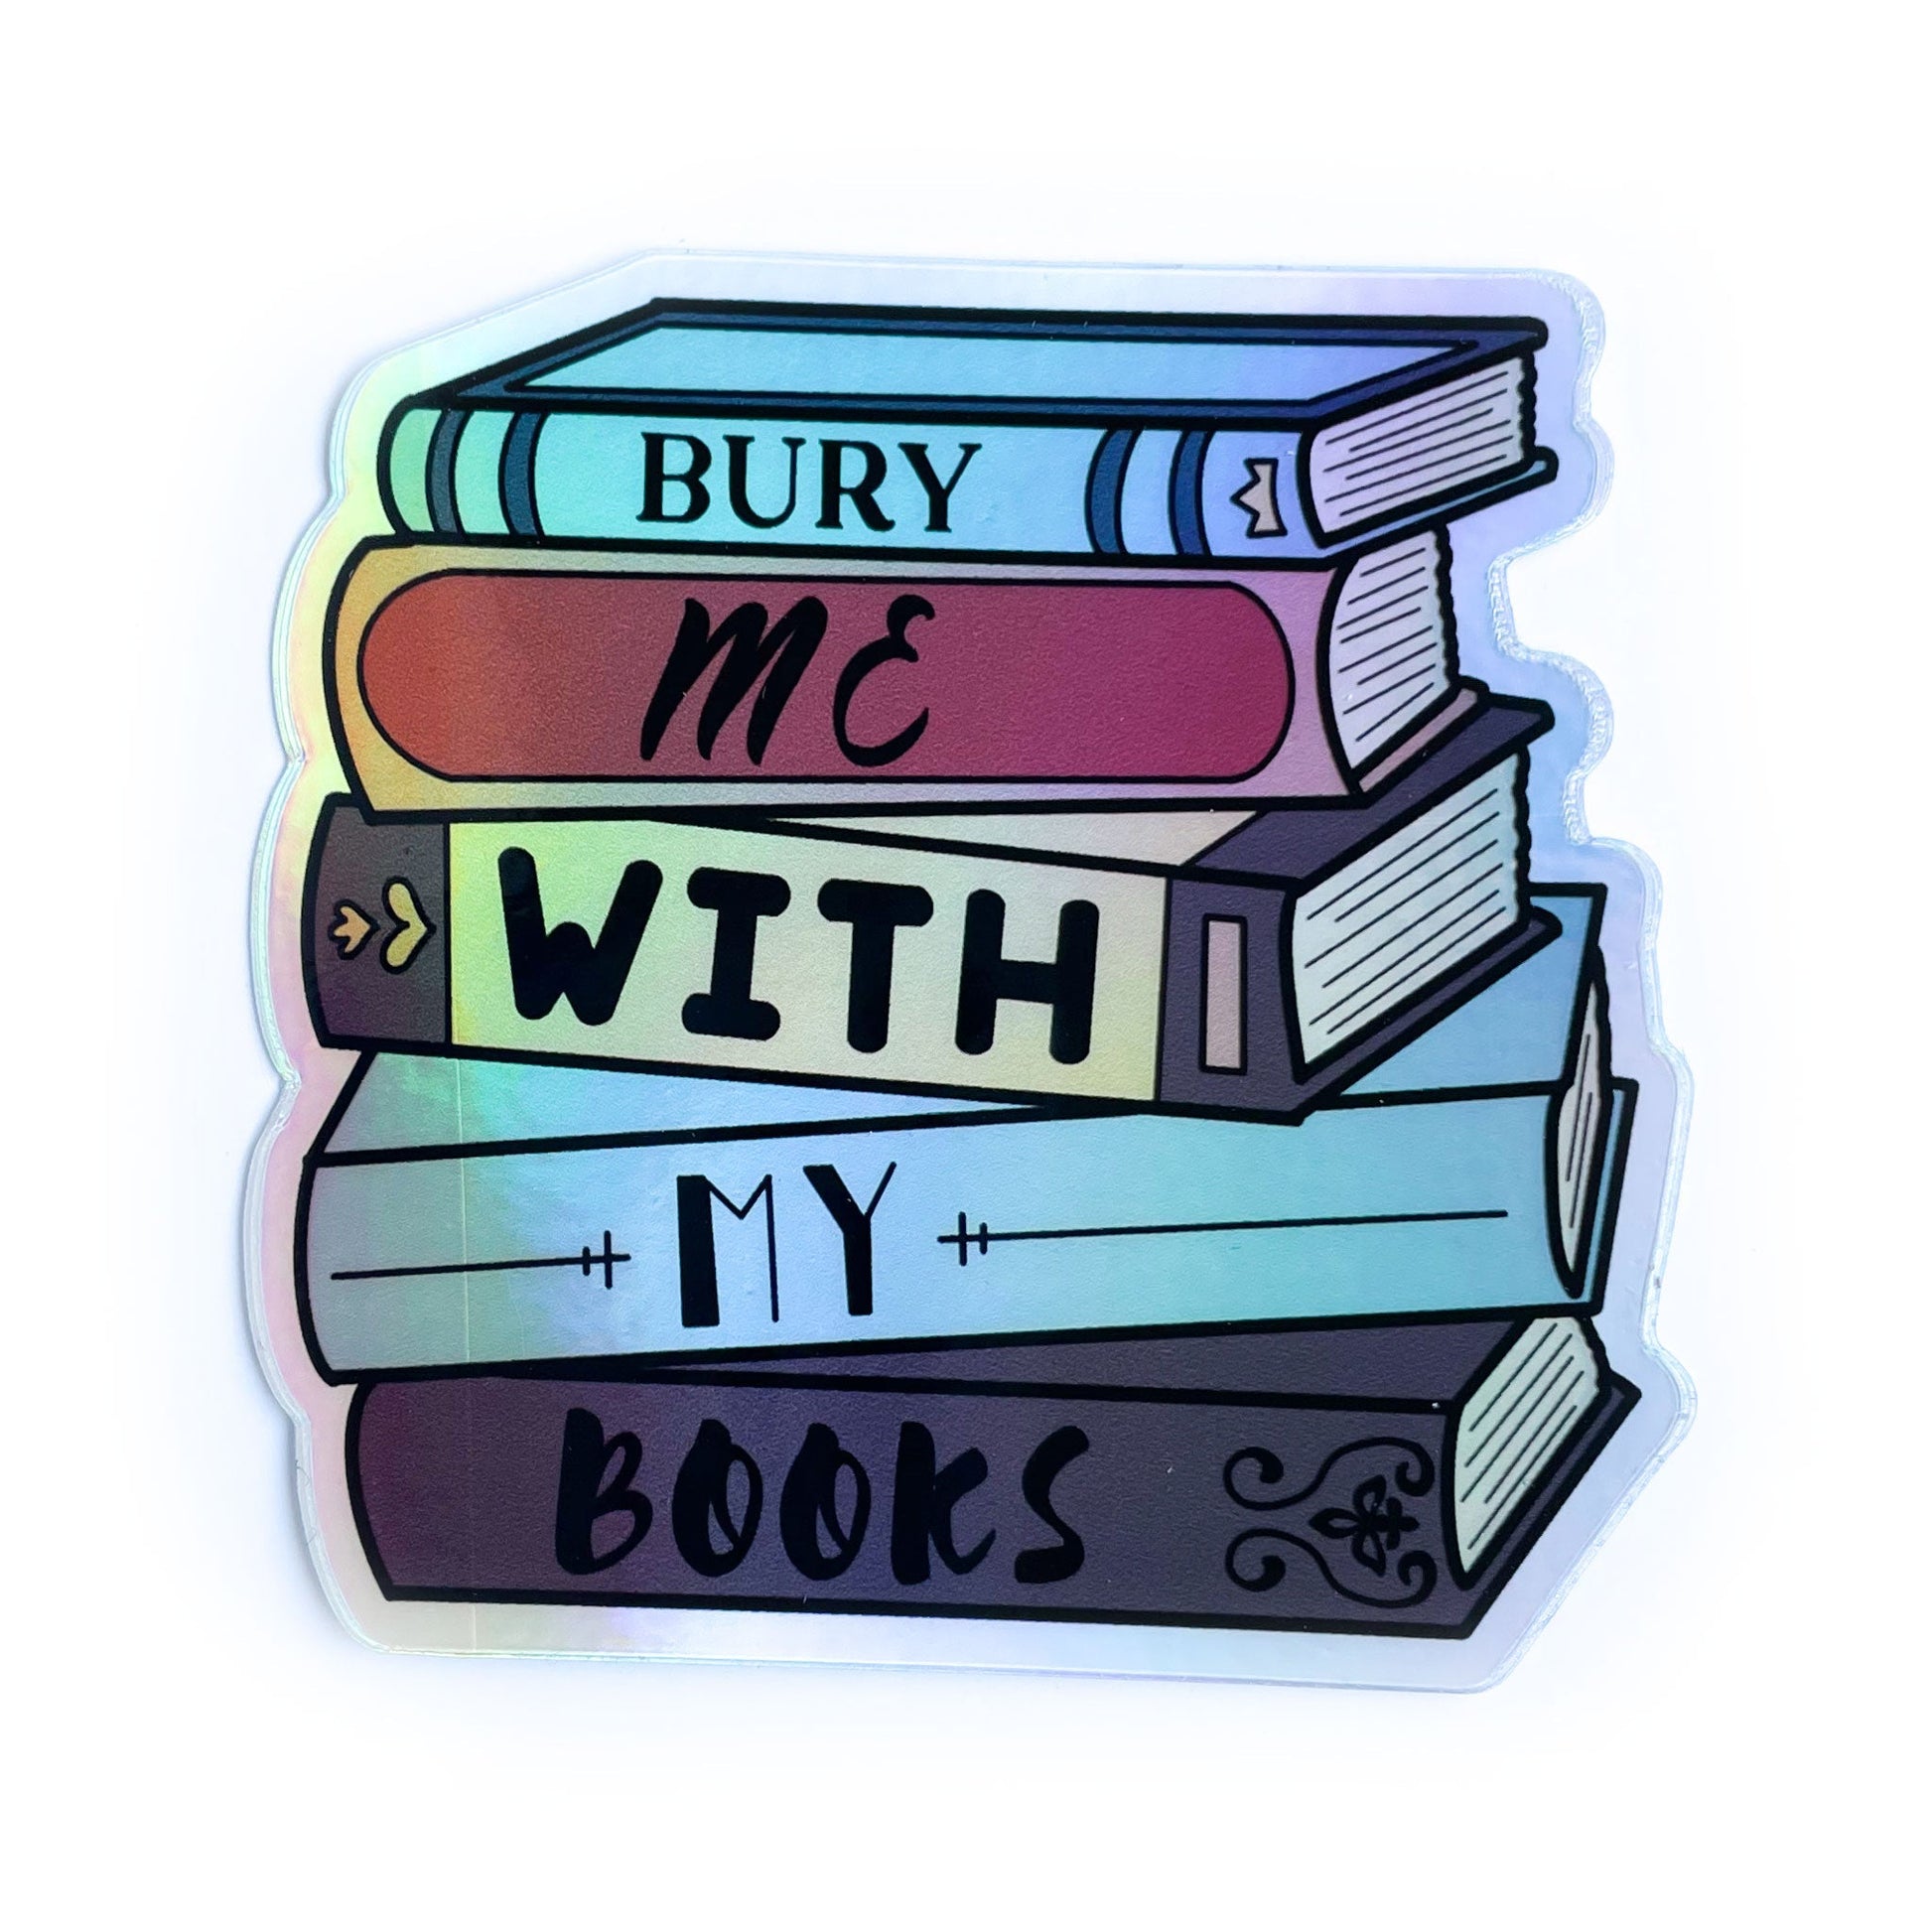 A sticker shaped like a stack of books that reads "Bury me with my books" 